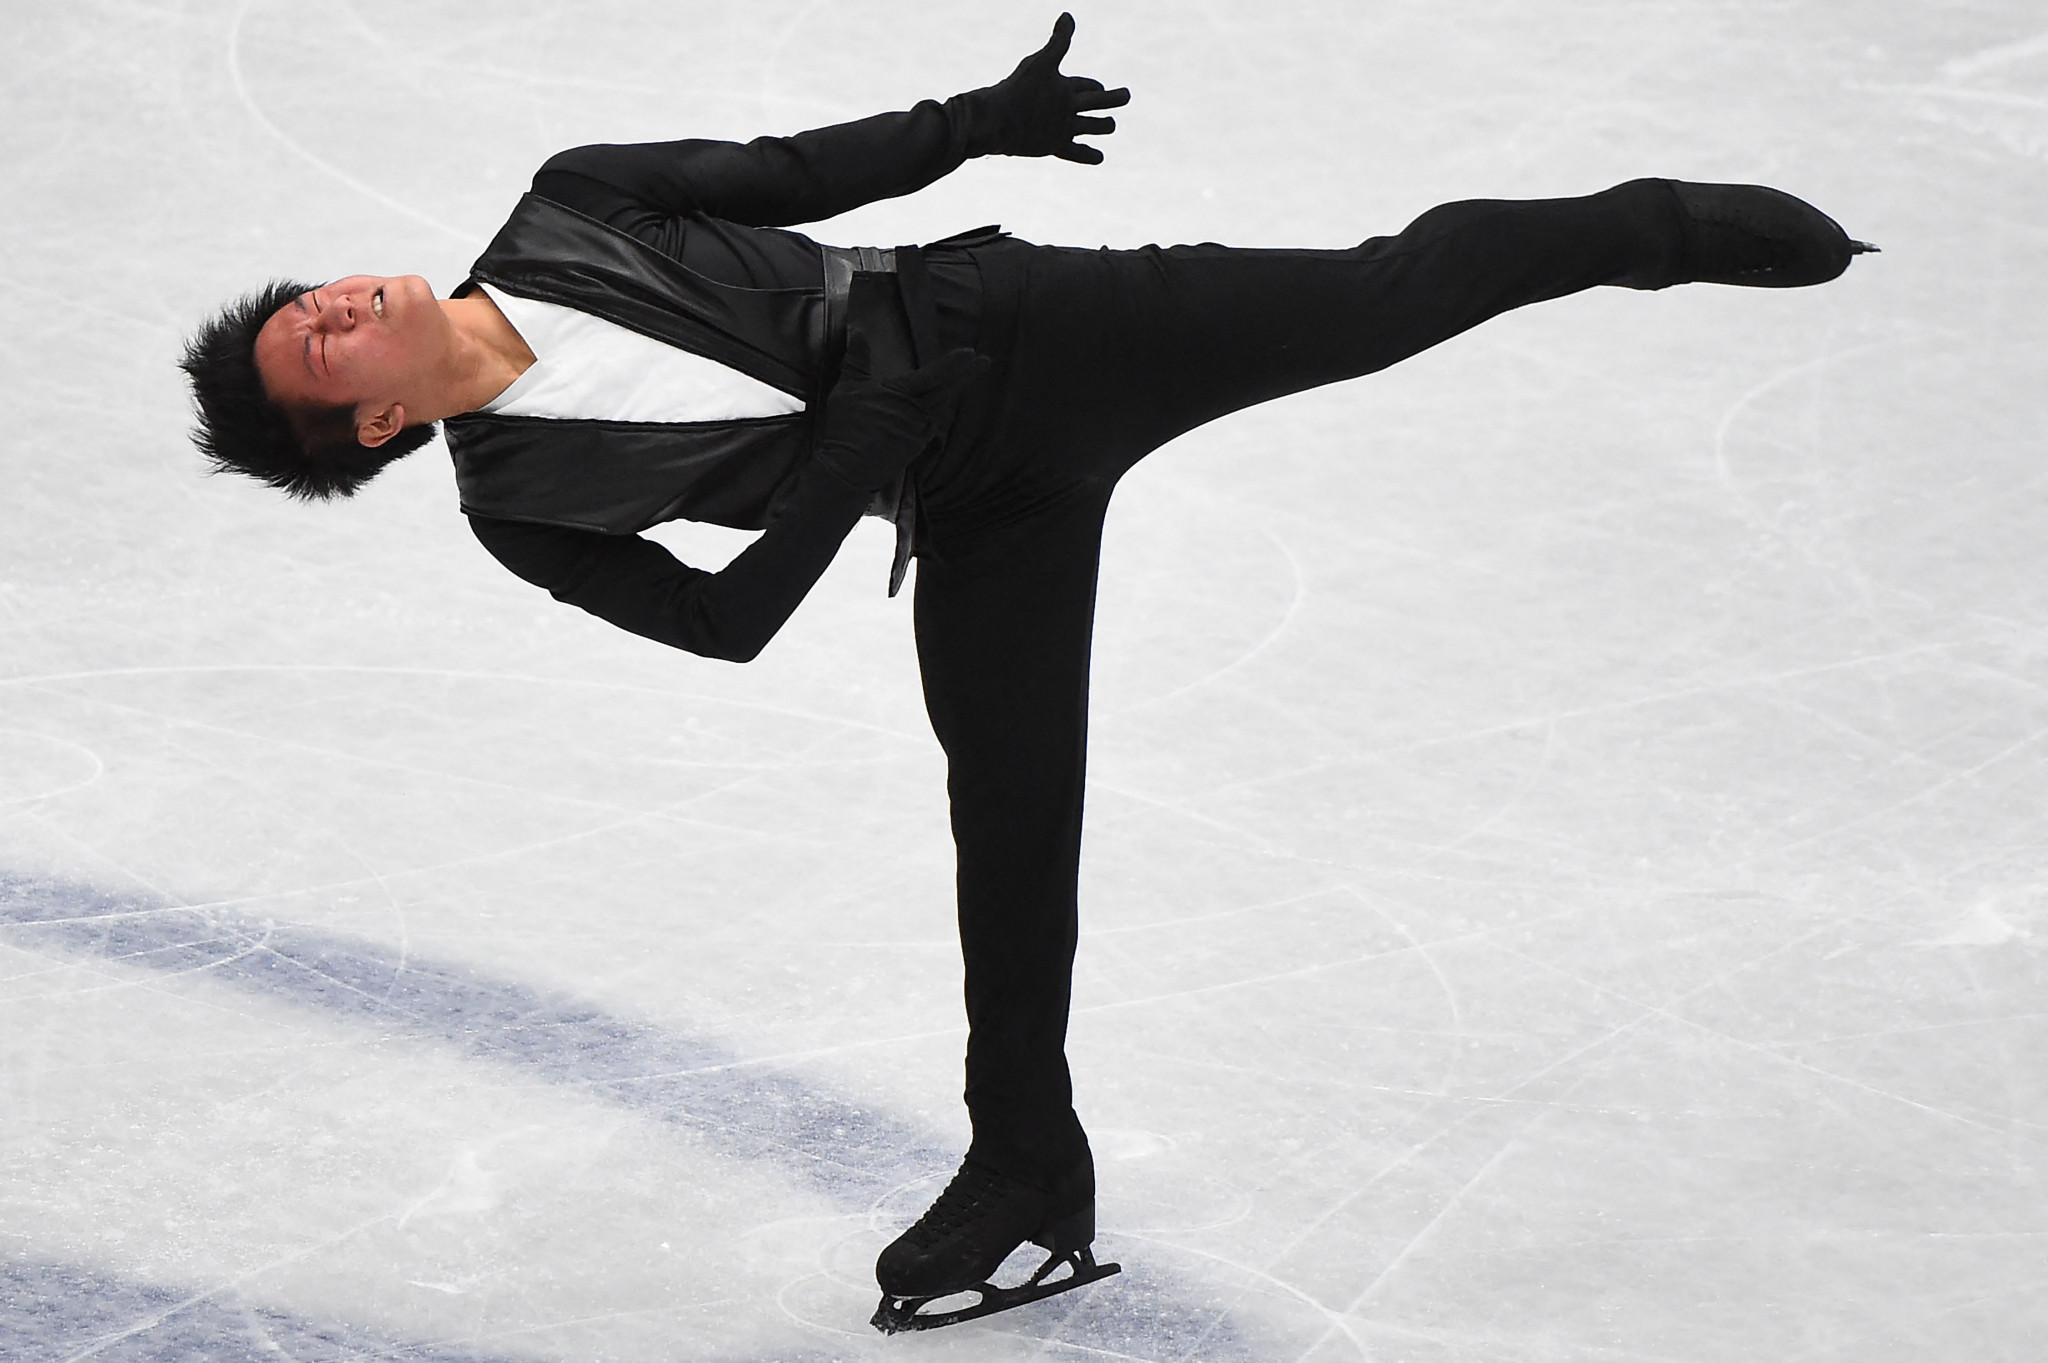 France's Adam Siao Him Fa won on home ice on day two of the ISU Grand Prix de France ©Getty Images